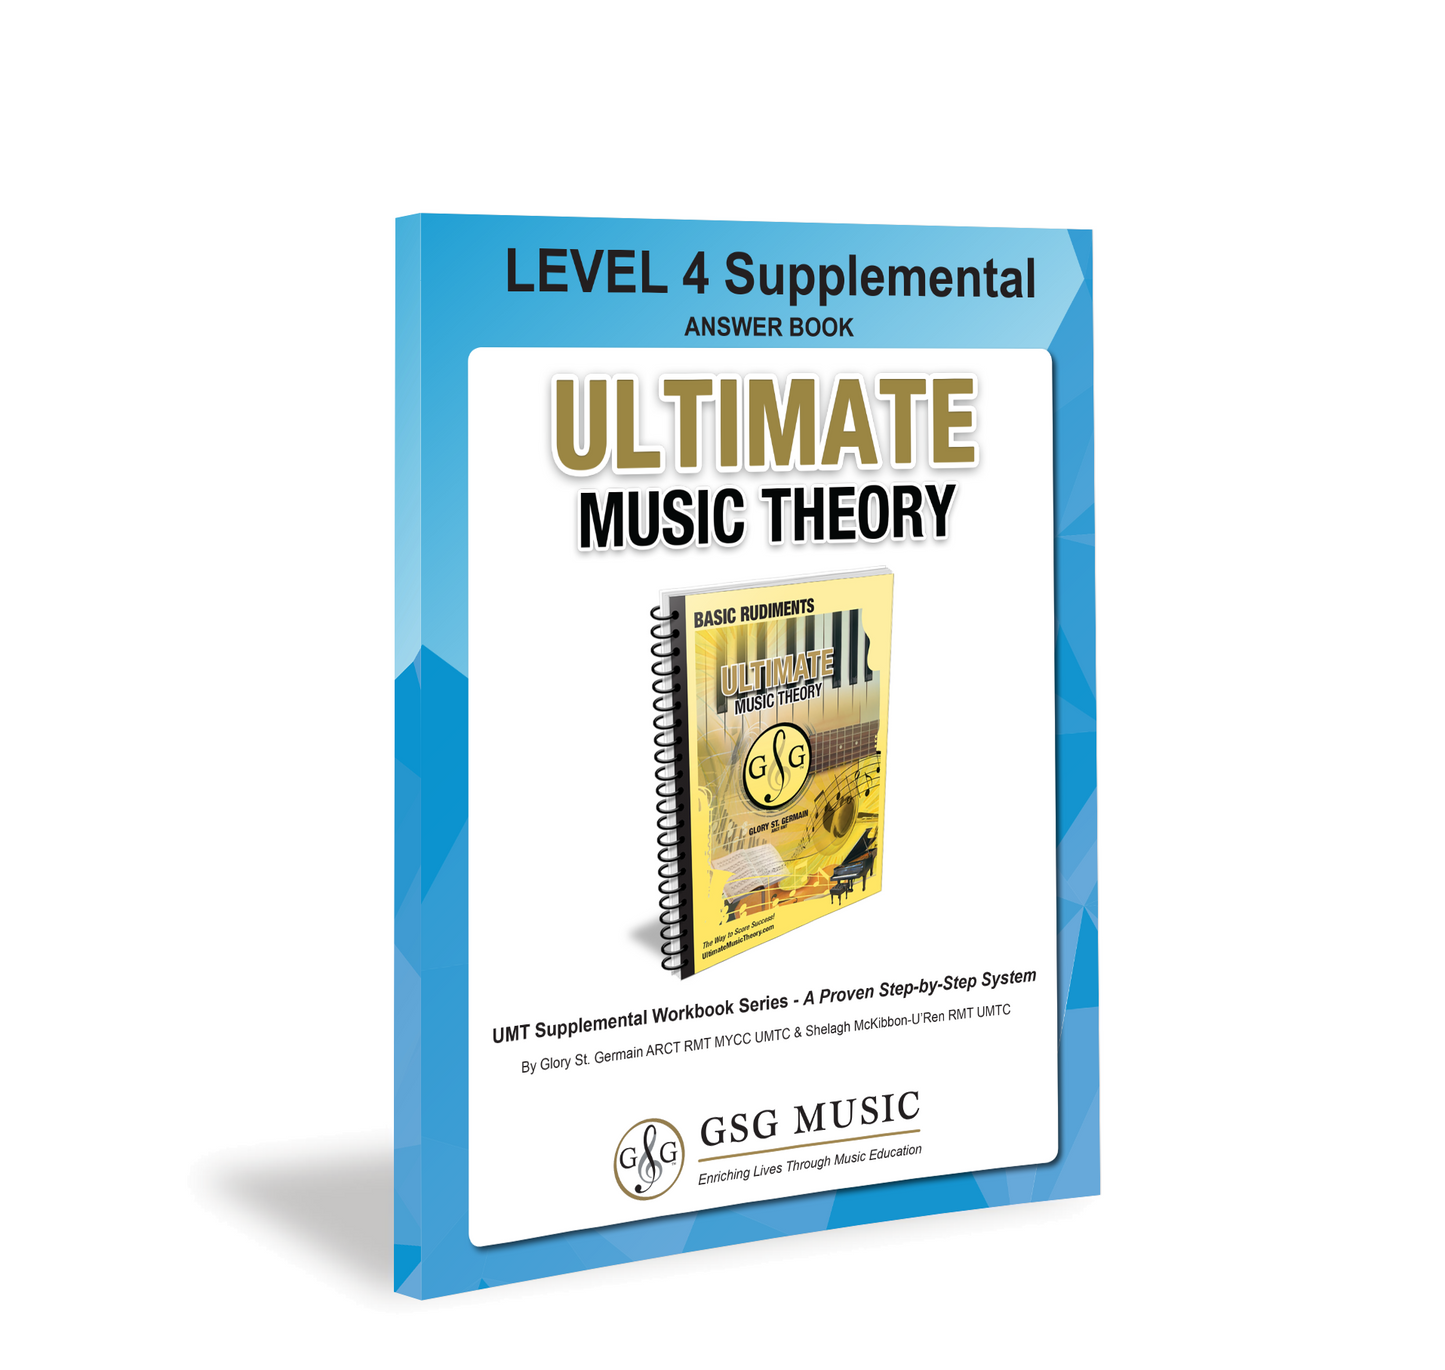 Ultimate Music Theory Level 4 Supplemental Answer Book